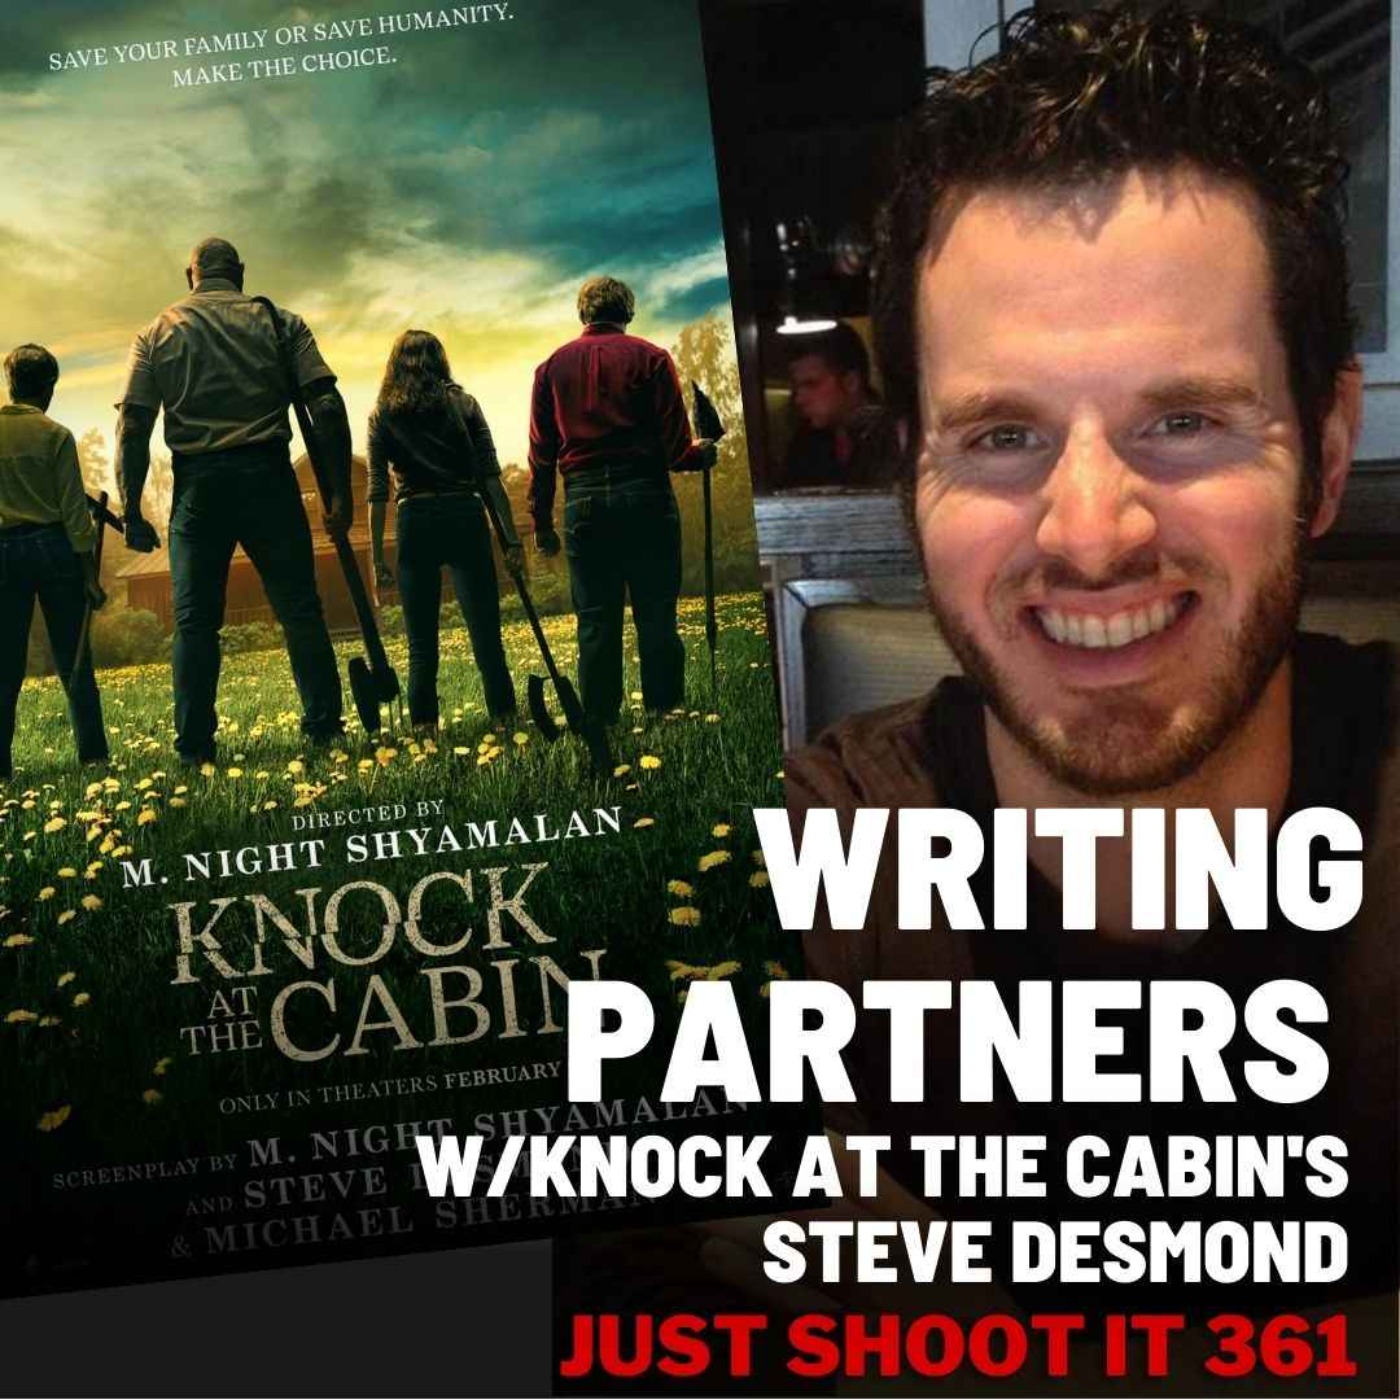 Writing Partners w/Knock at the Cabin's Steve Desmond - Just Shoot It 361